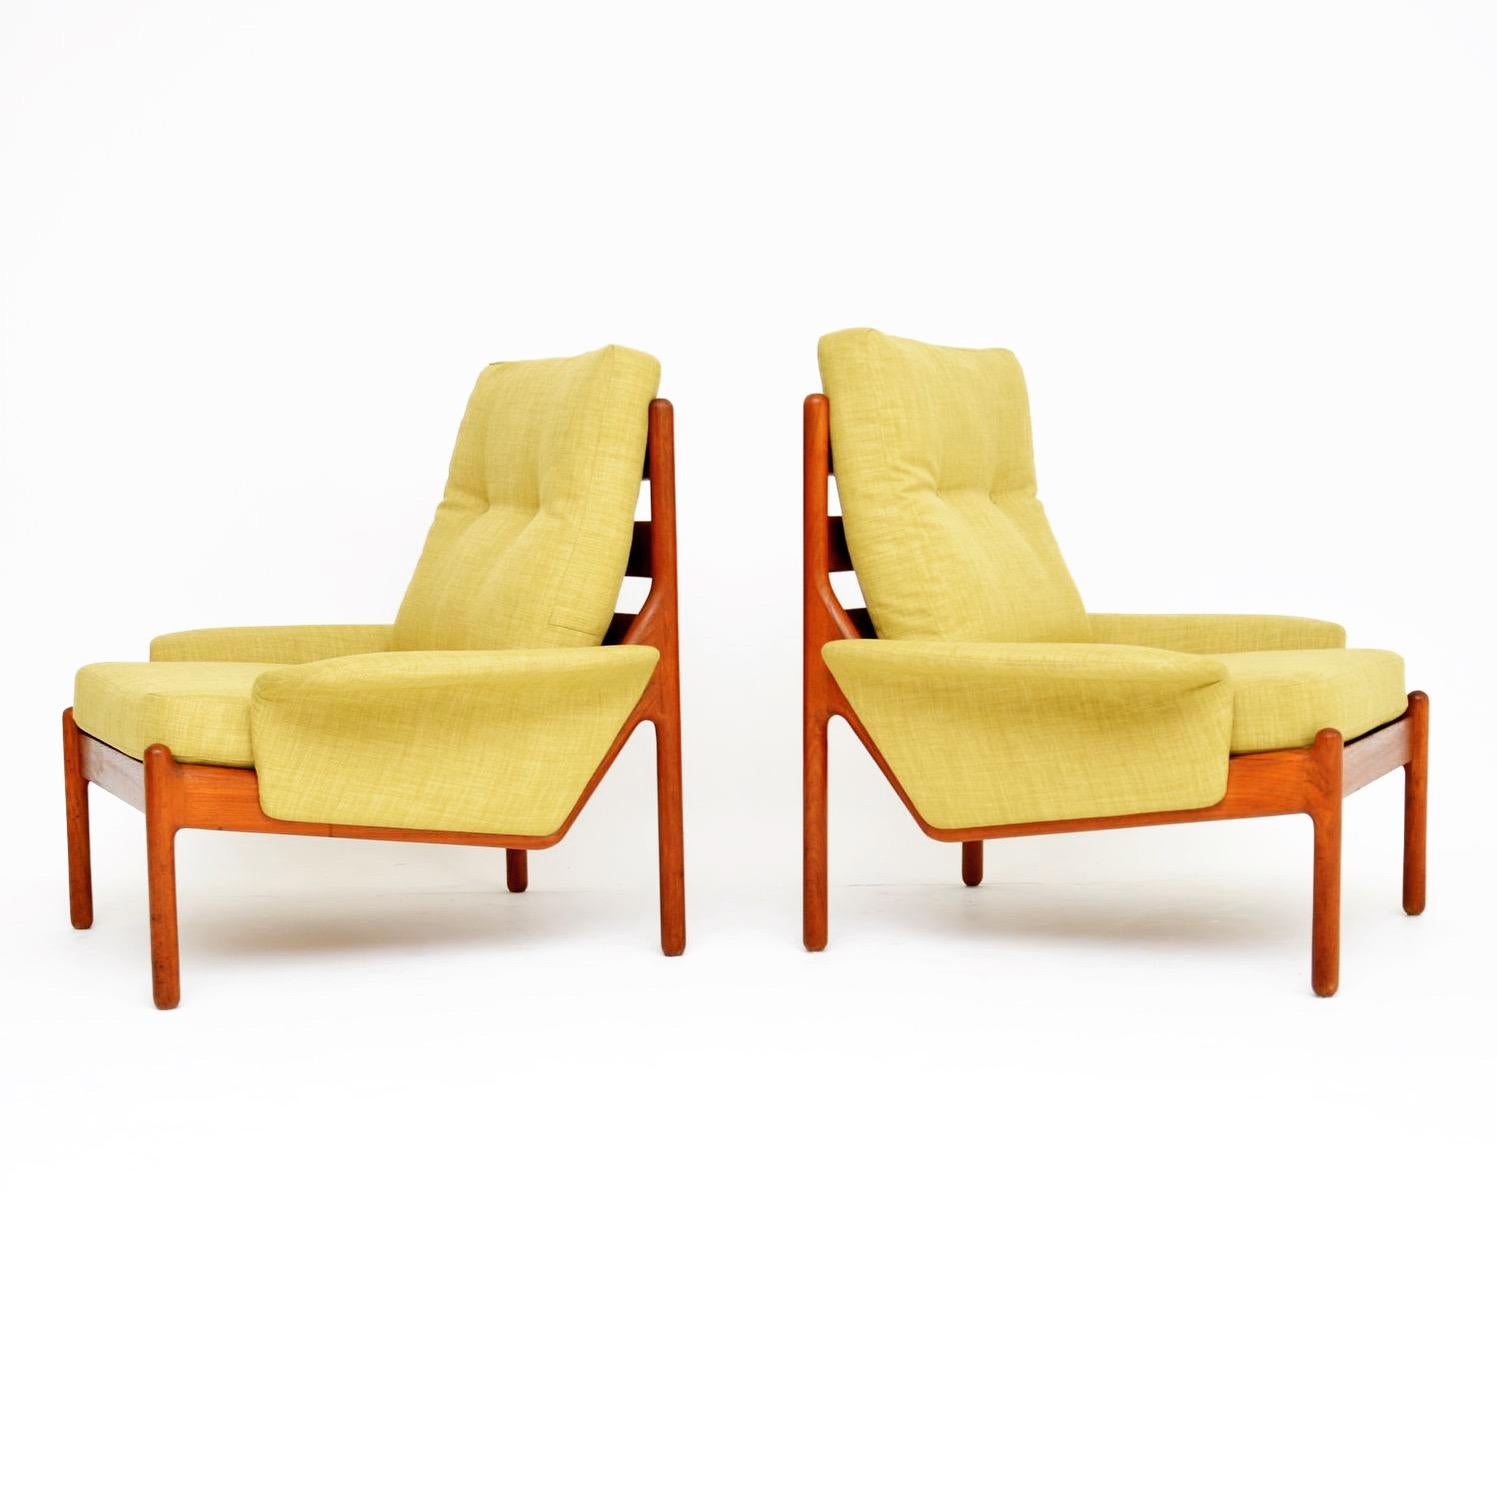 A stylish and extremely comfortable pair of Danish armchairs in solid teak. These were designed by Johannes Andersen and were made in Denmark by Silkeborg. They date from the 1960s, and are in superb condition for their age. We have had these fully